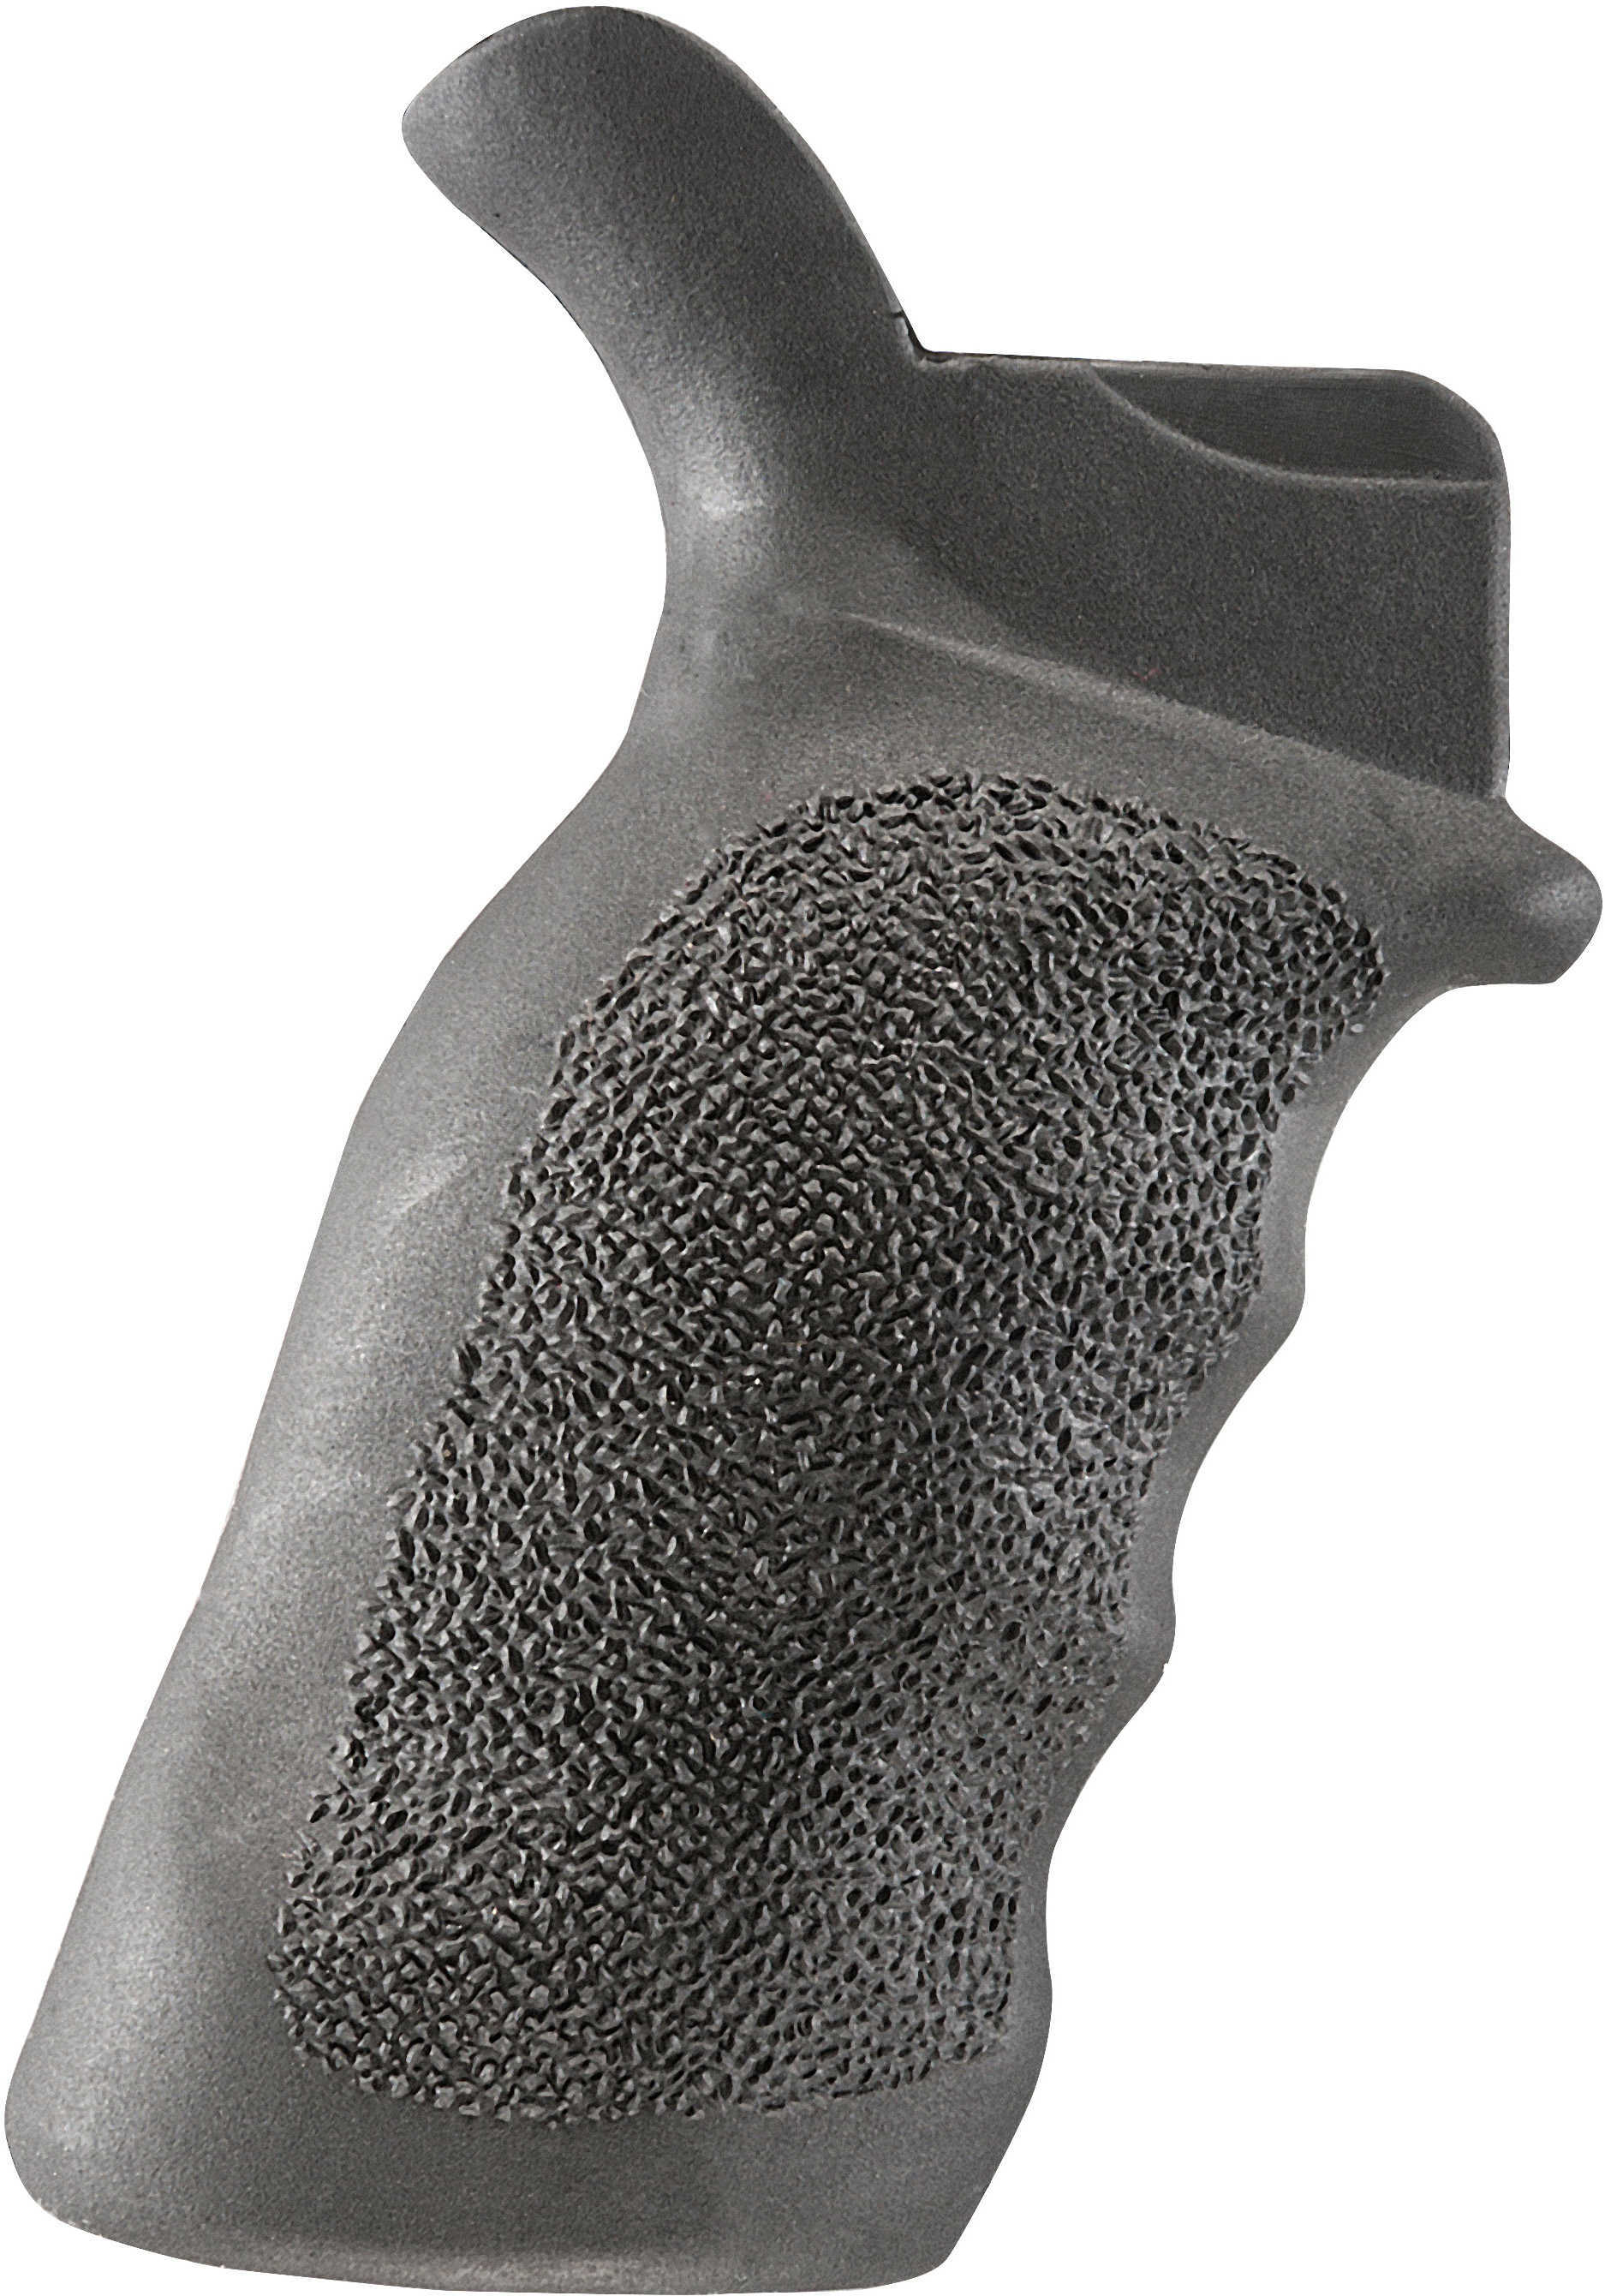 Falcon Industries Inc Black Tactical Grip For AR-15/M16 Md: 4045Bk